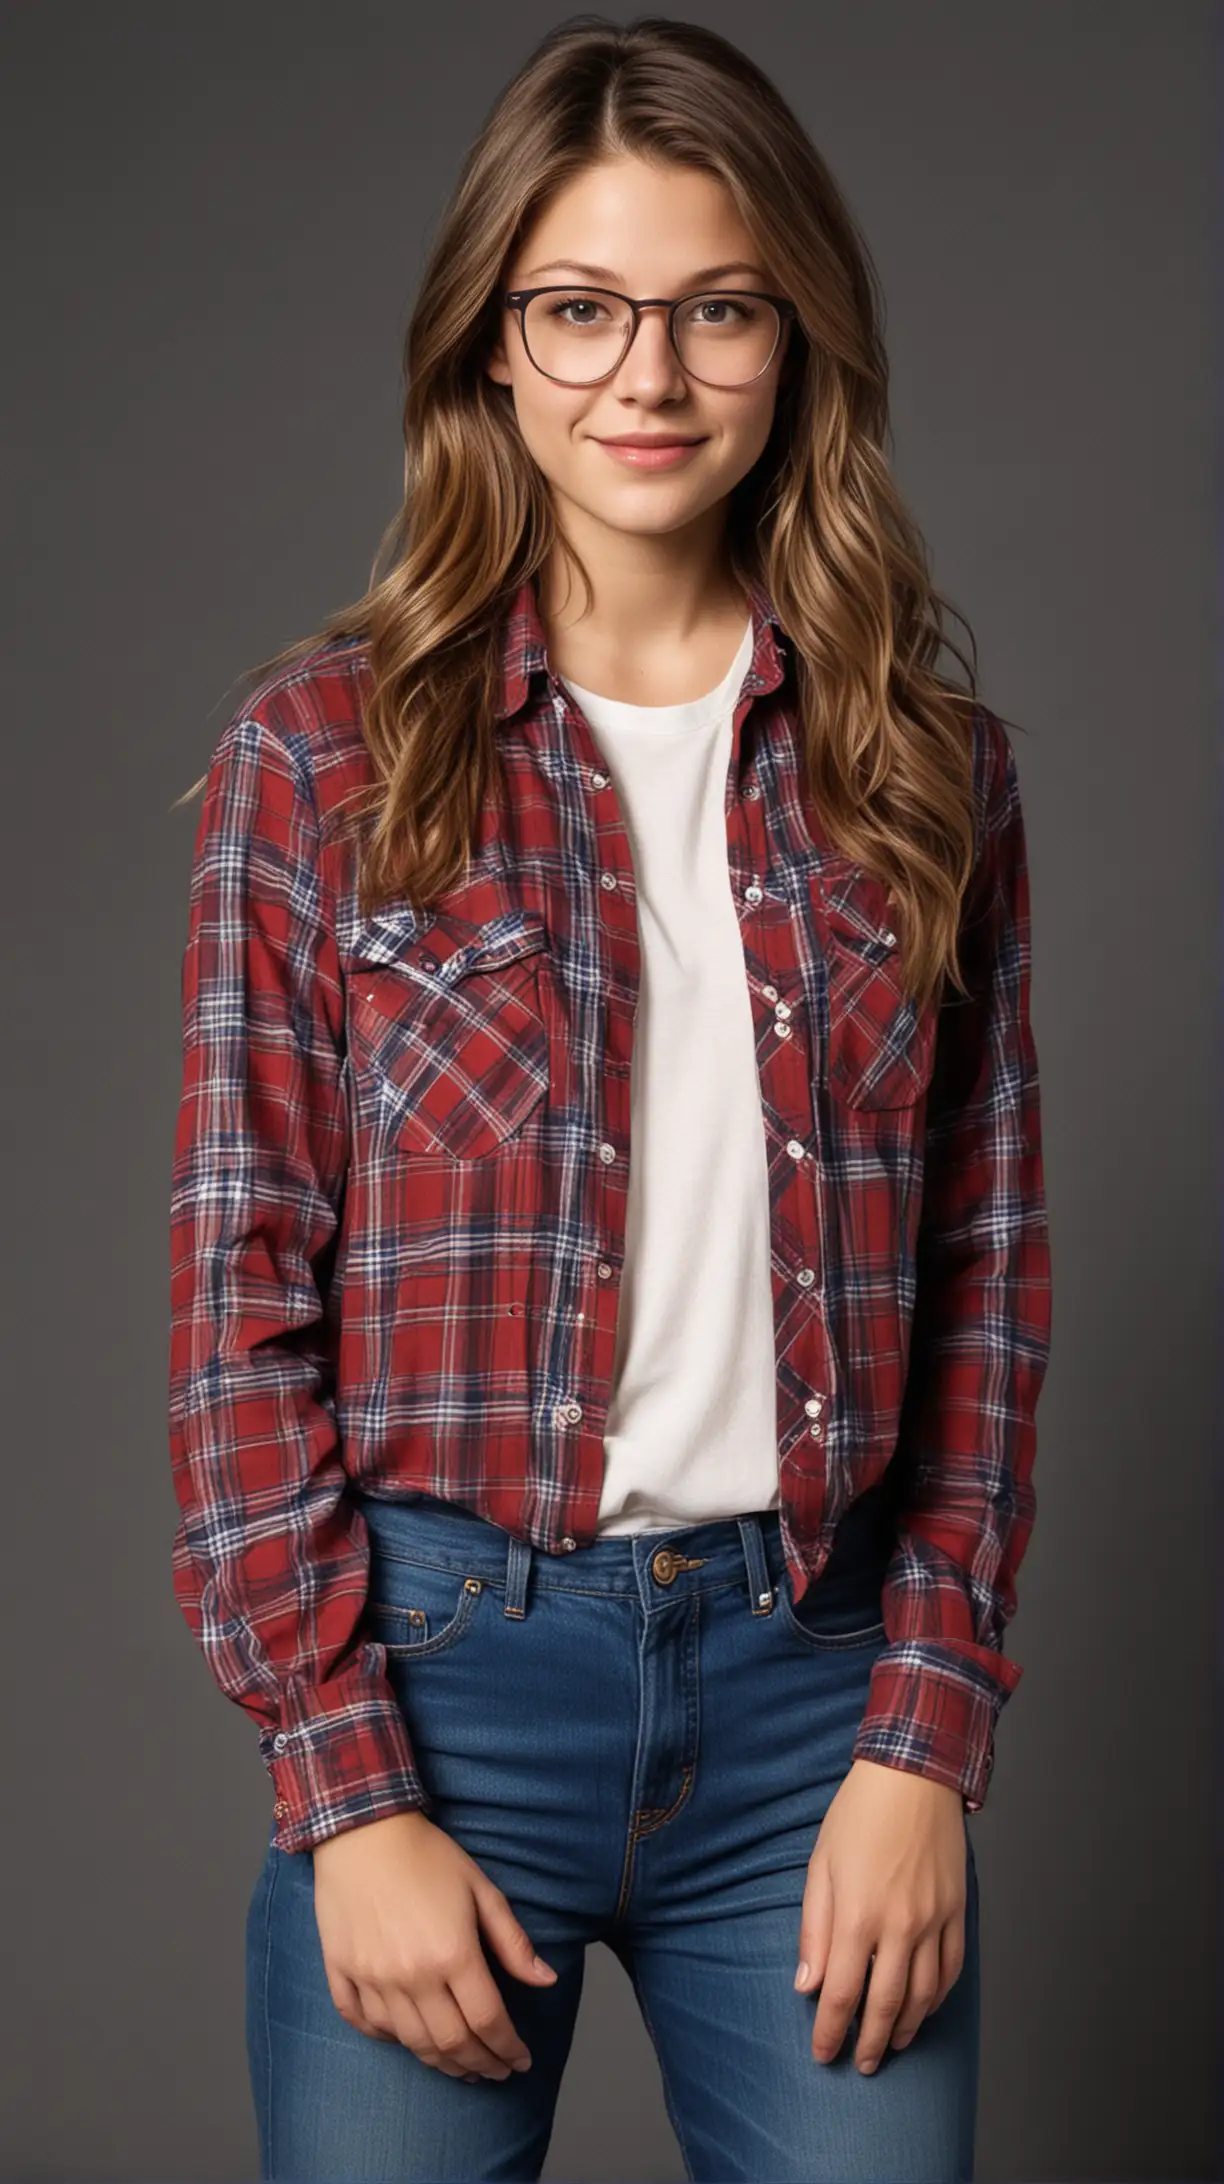 20-year-old Melissa Benoist with long hair. Wearing glasses a flannel shirt and jeans in 1980s, Stranger Things